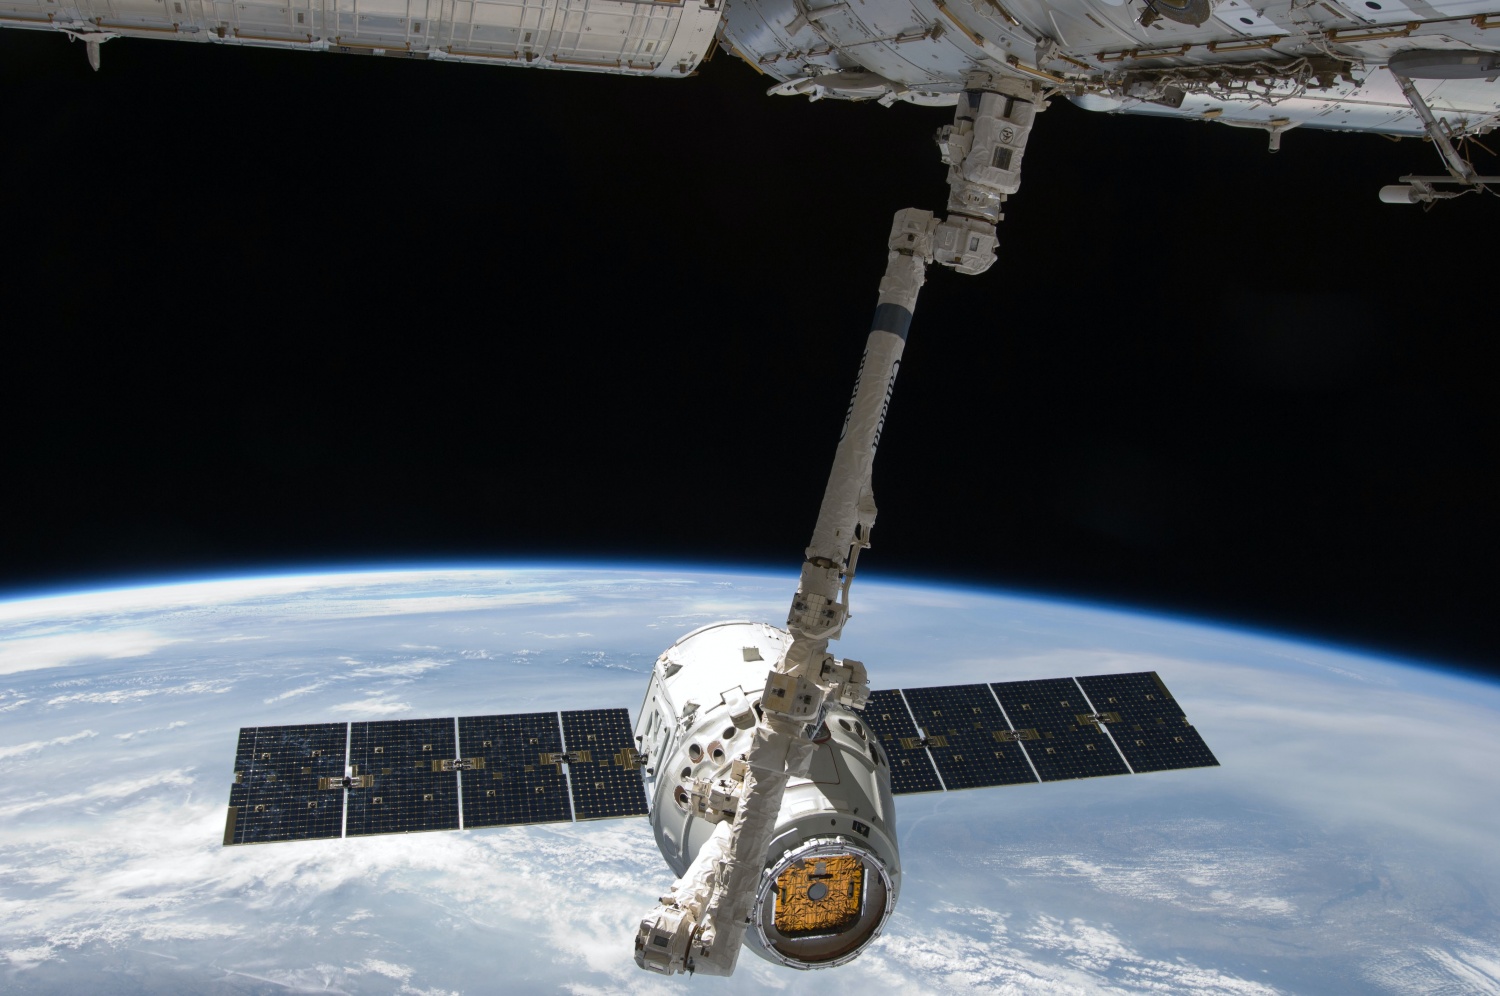 Russia To Pull Out of ISS by 2024, Seeks To Build Its Own Orbiting